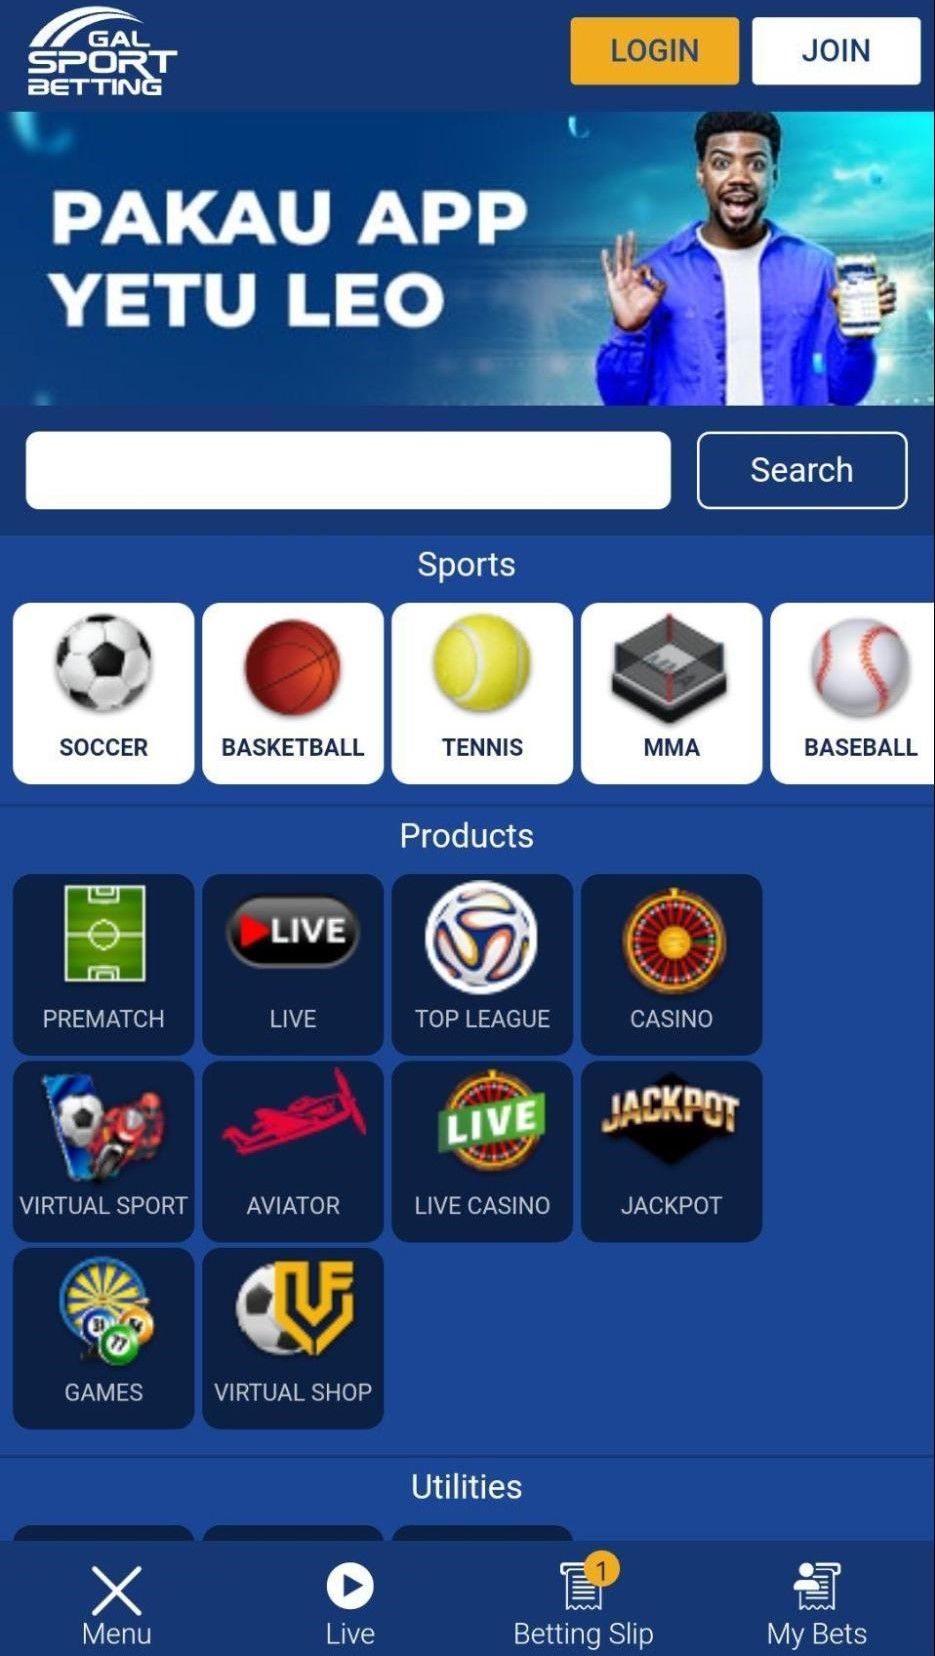 Gal sports betting mobile